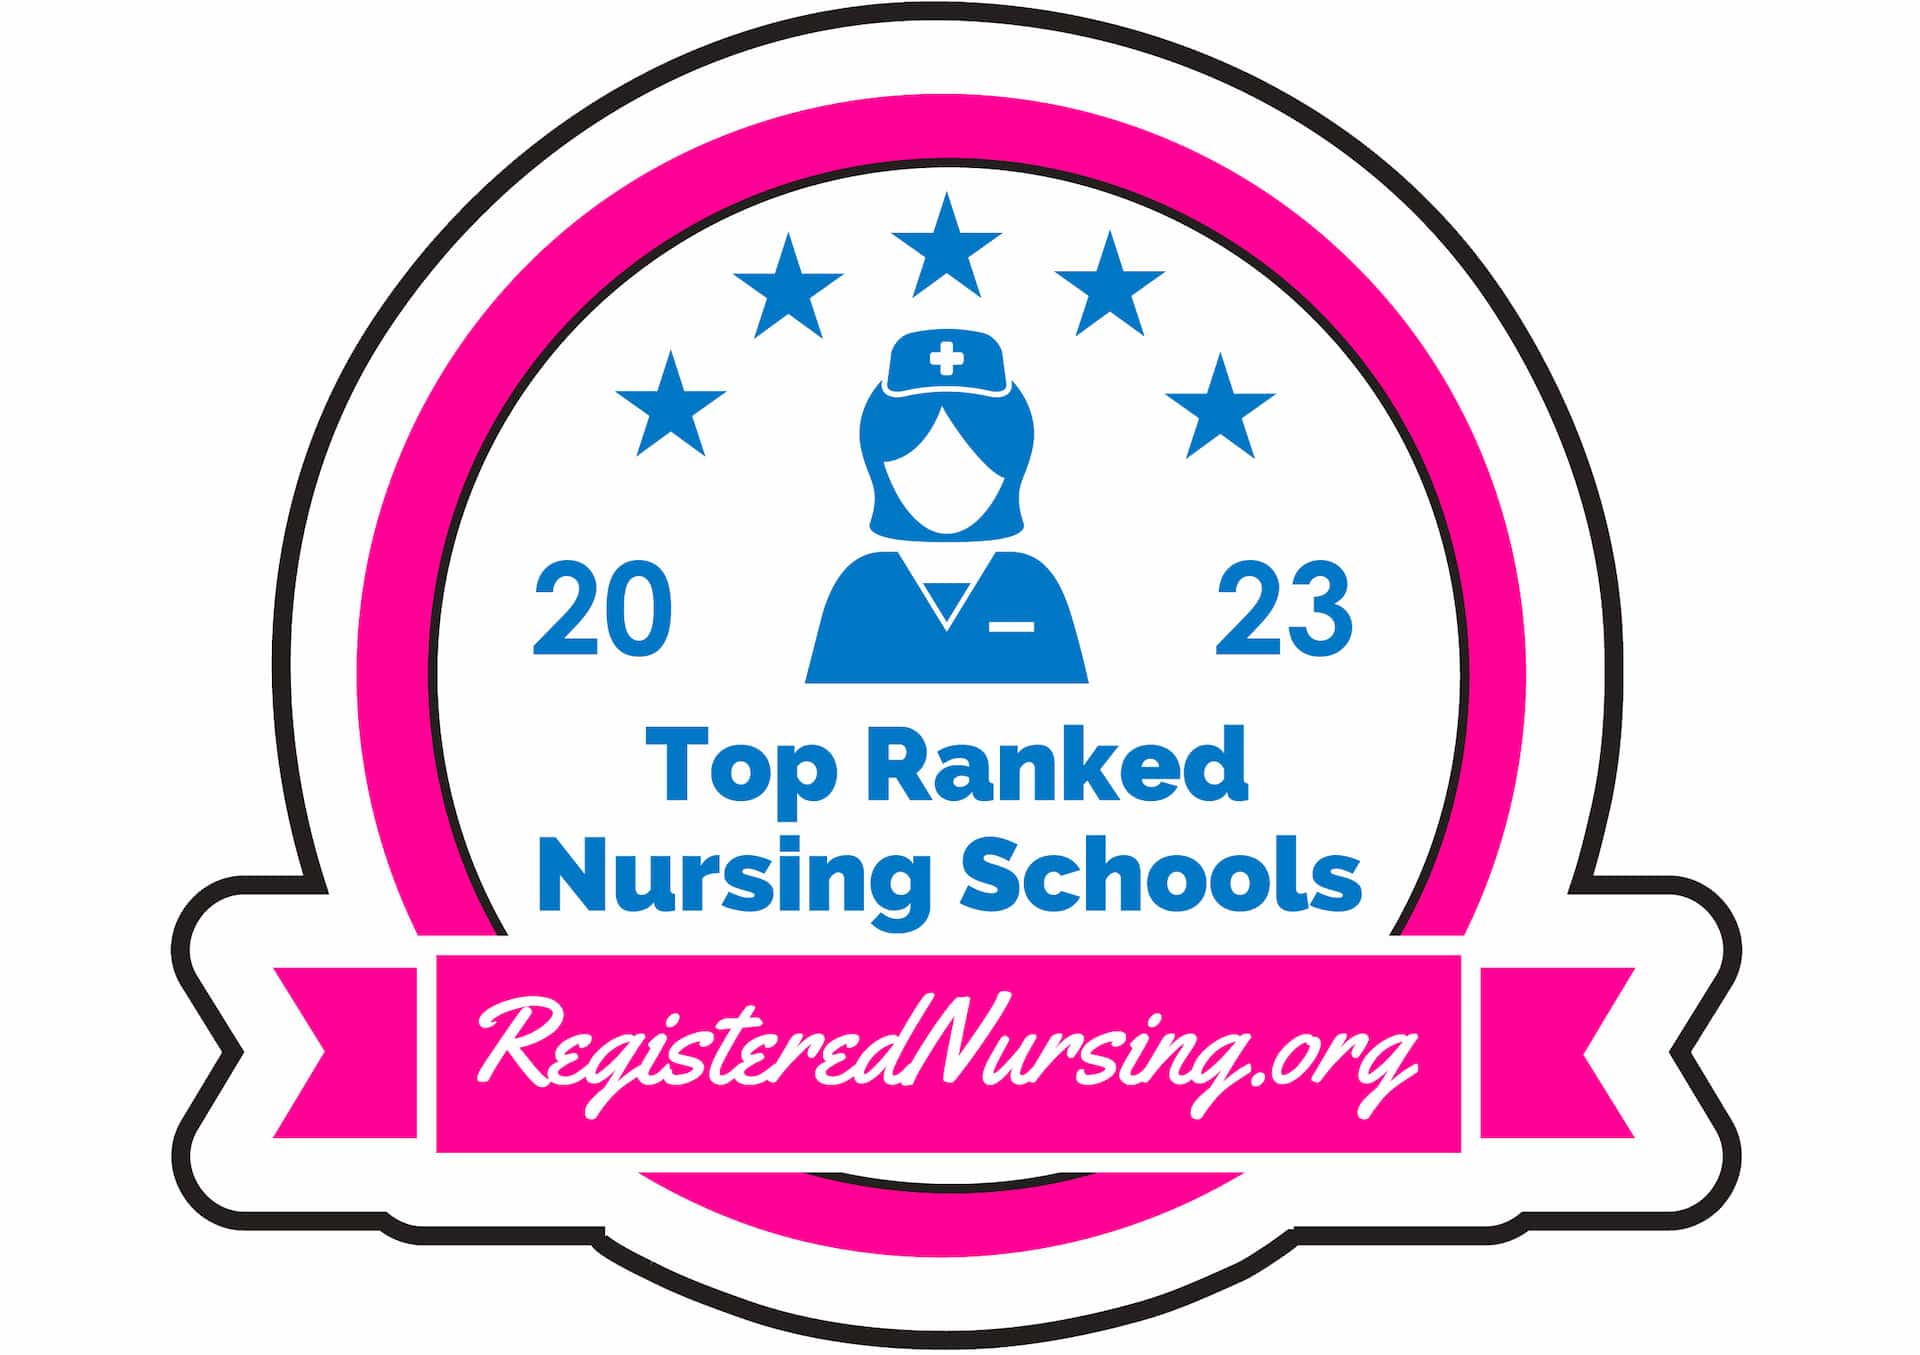 Randolph Community College’s Nursing program was recently ranked third in the state for 2023 by RegisteredNursing.org.